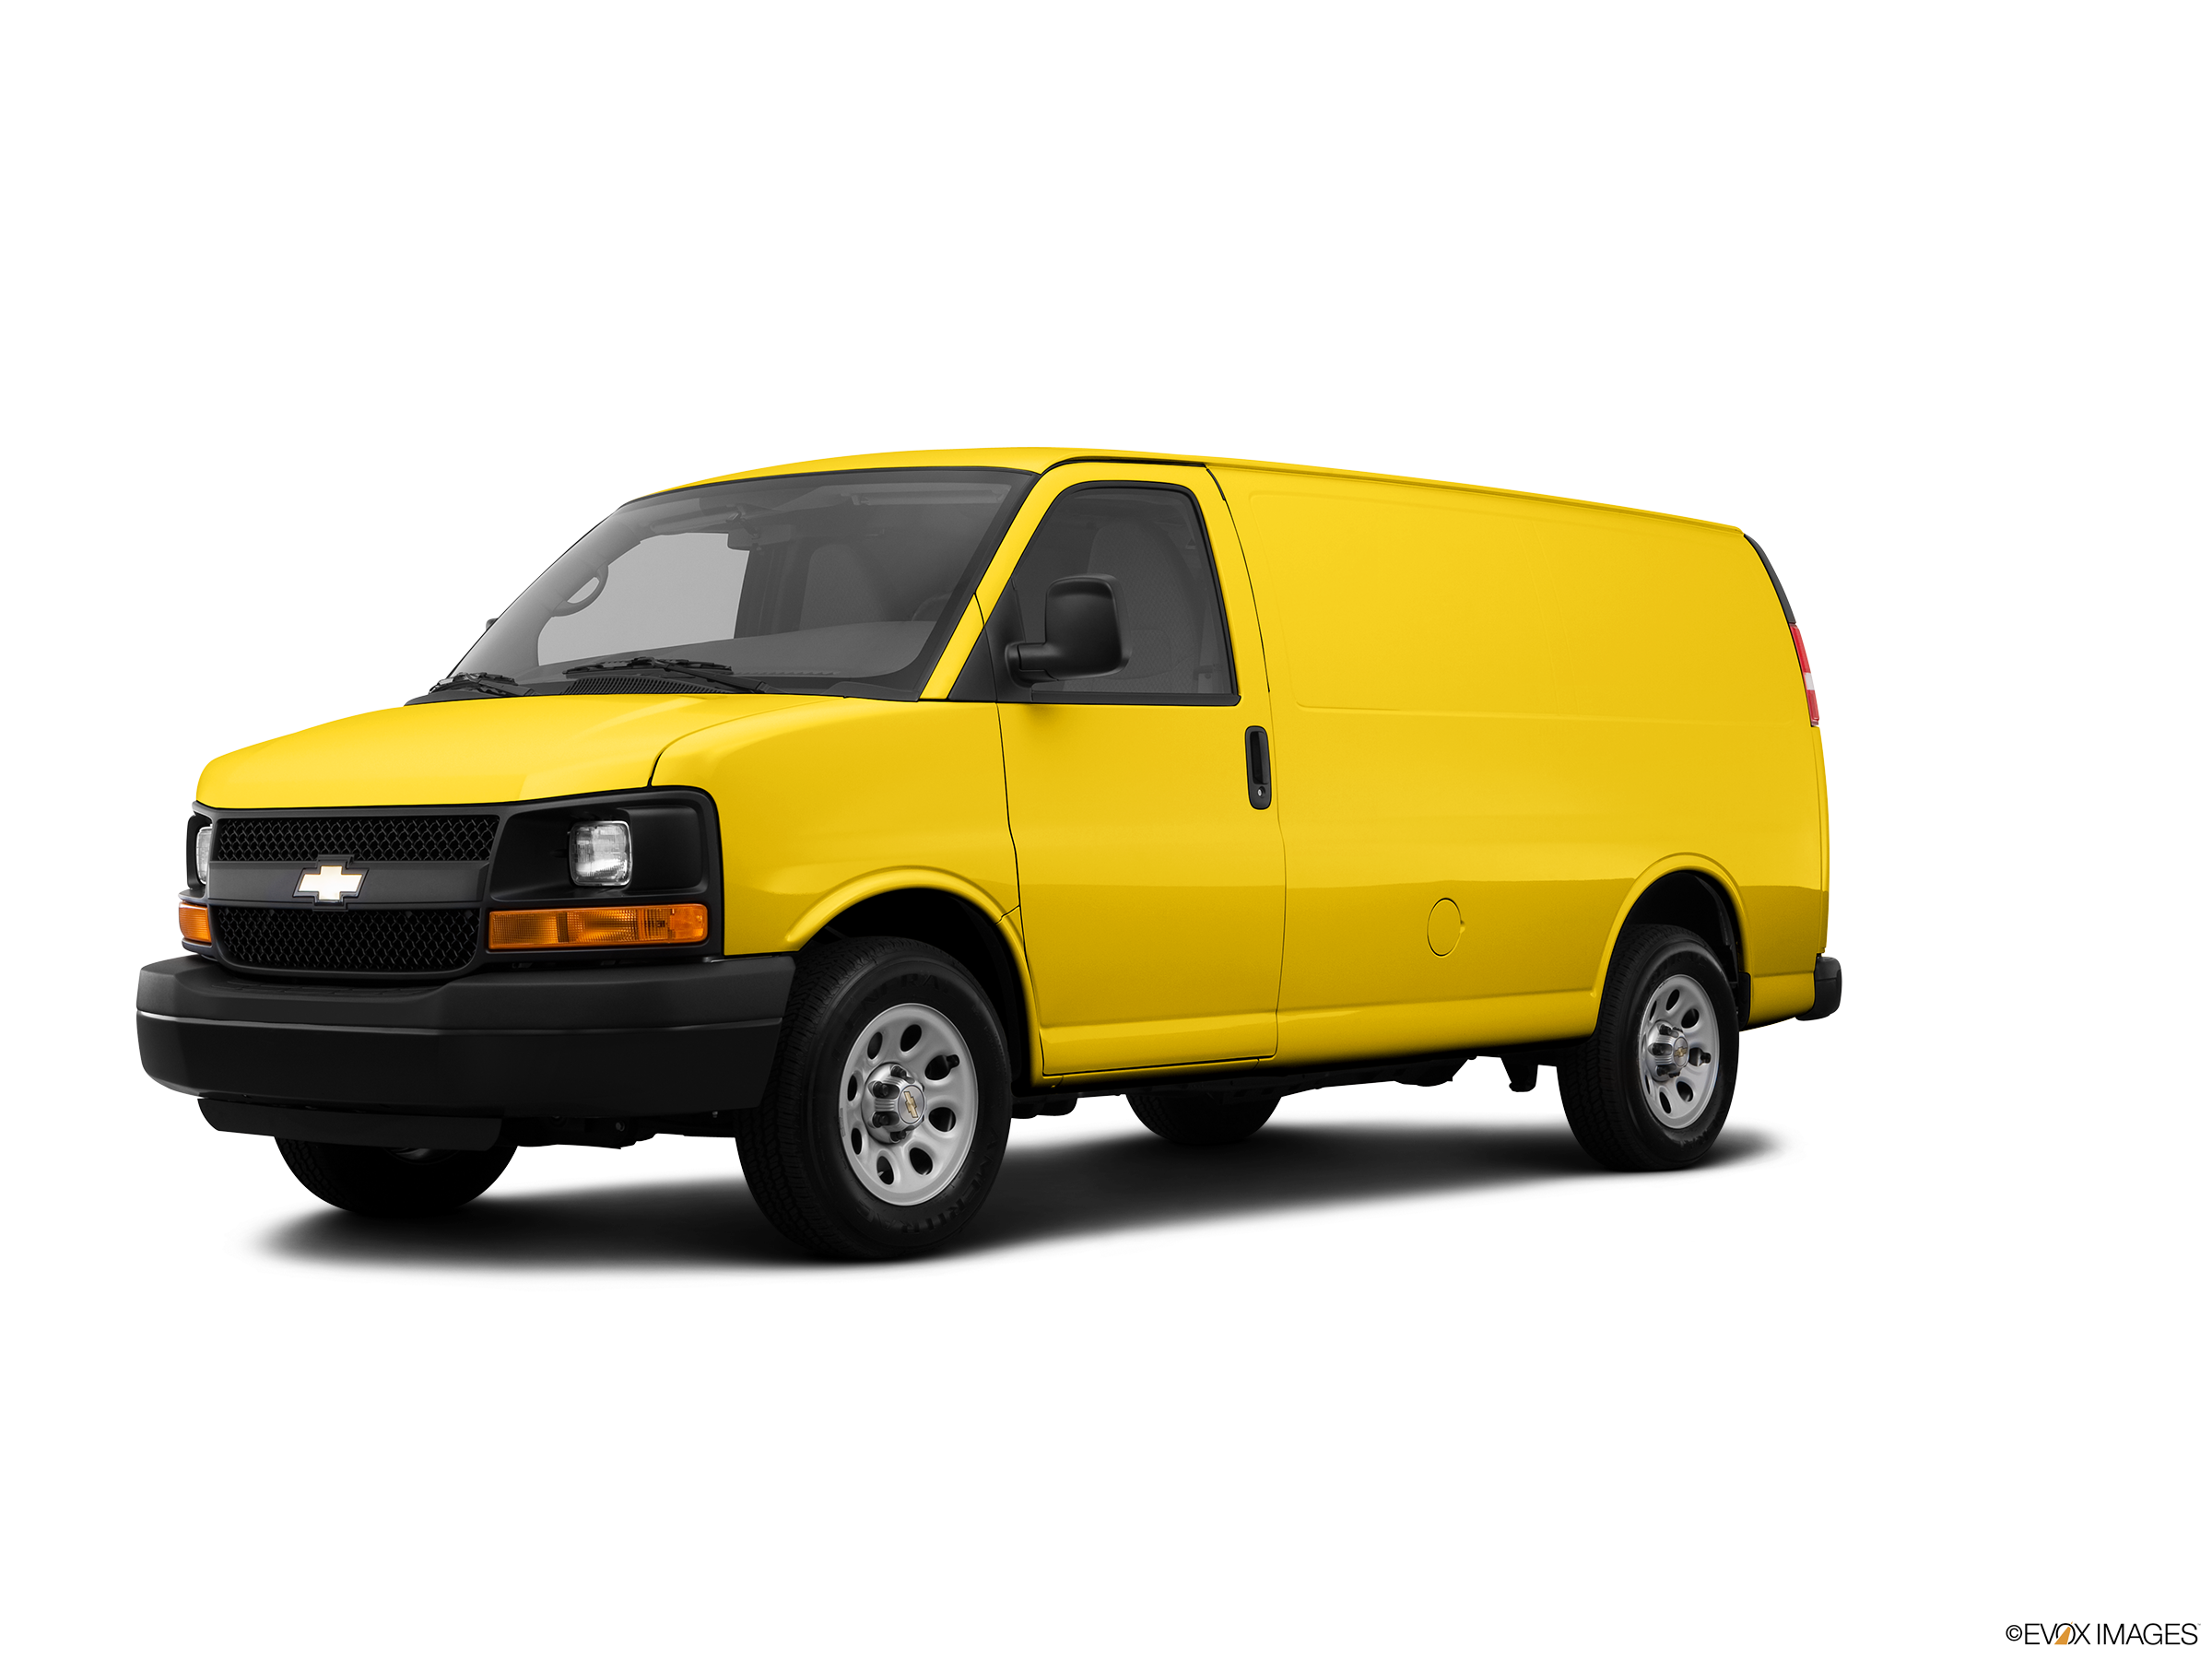 2013 Chevrolet Express Cube Cut-Away Mobility Bus